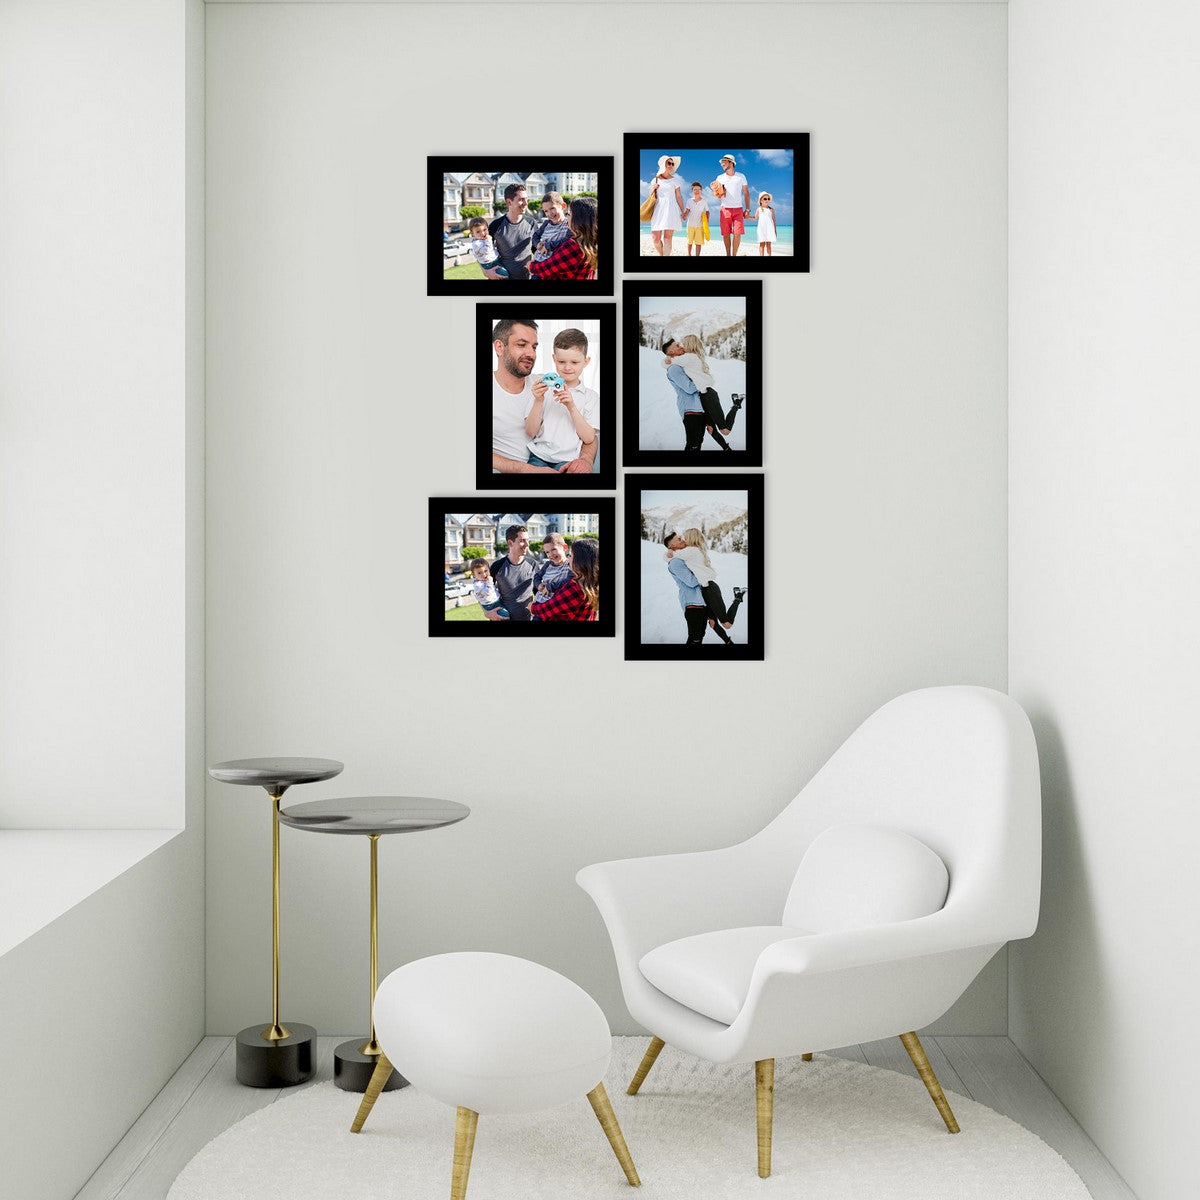 Memory Wall Collage Photo Frame - Set of 6 Photo Frames for 6 Photos of 6"x8" 2